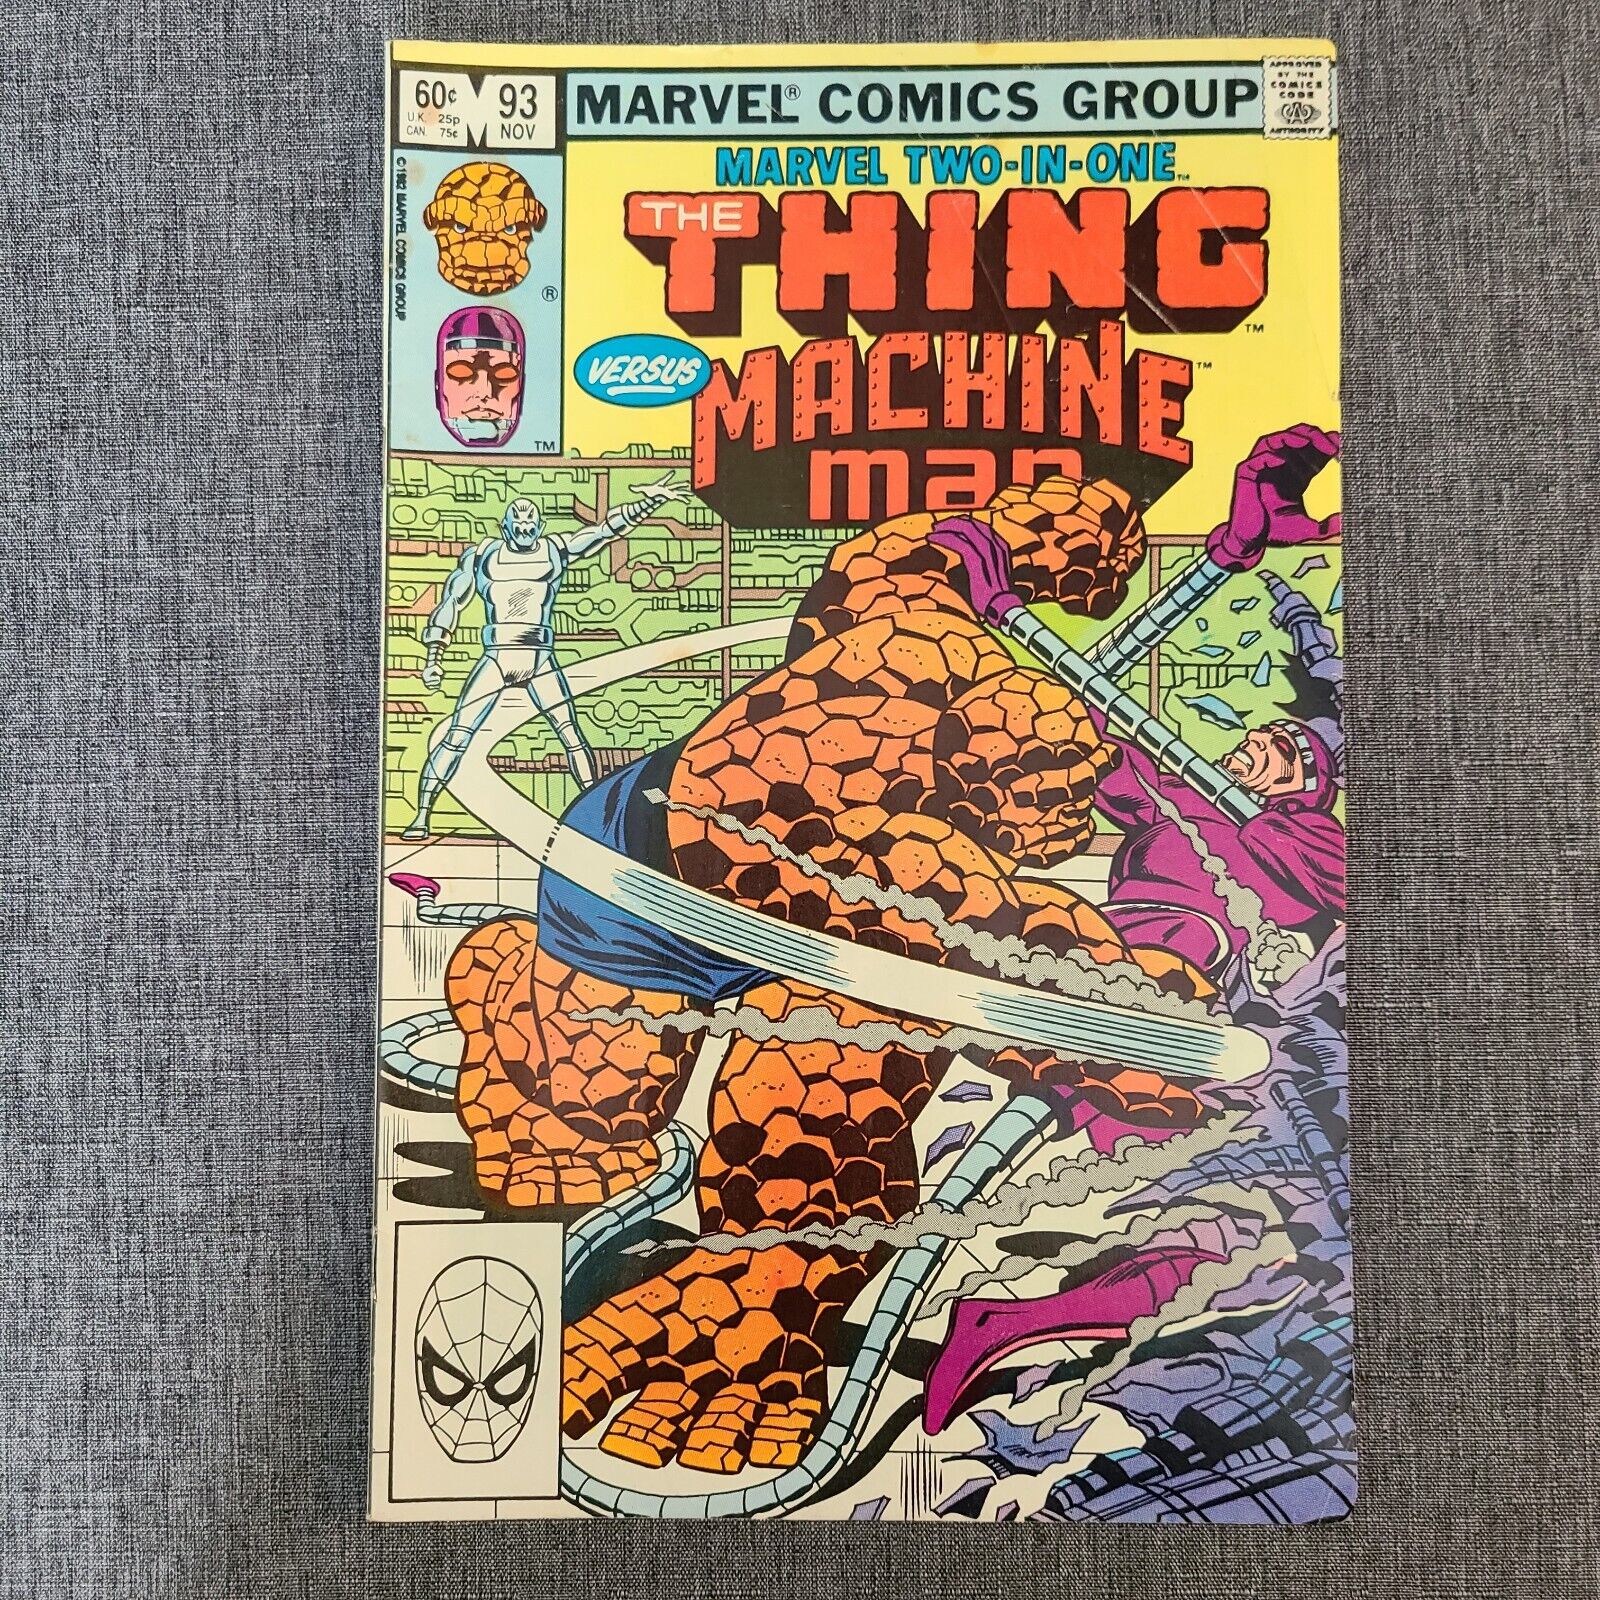 Marvel Two in One, Thing vs. Machine Man #93, Marvel 1982